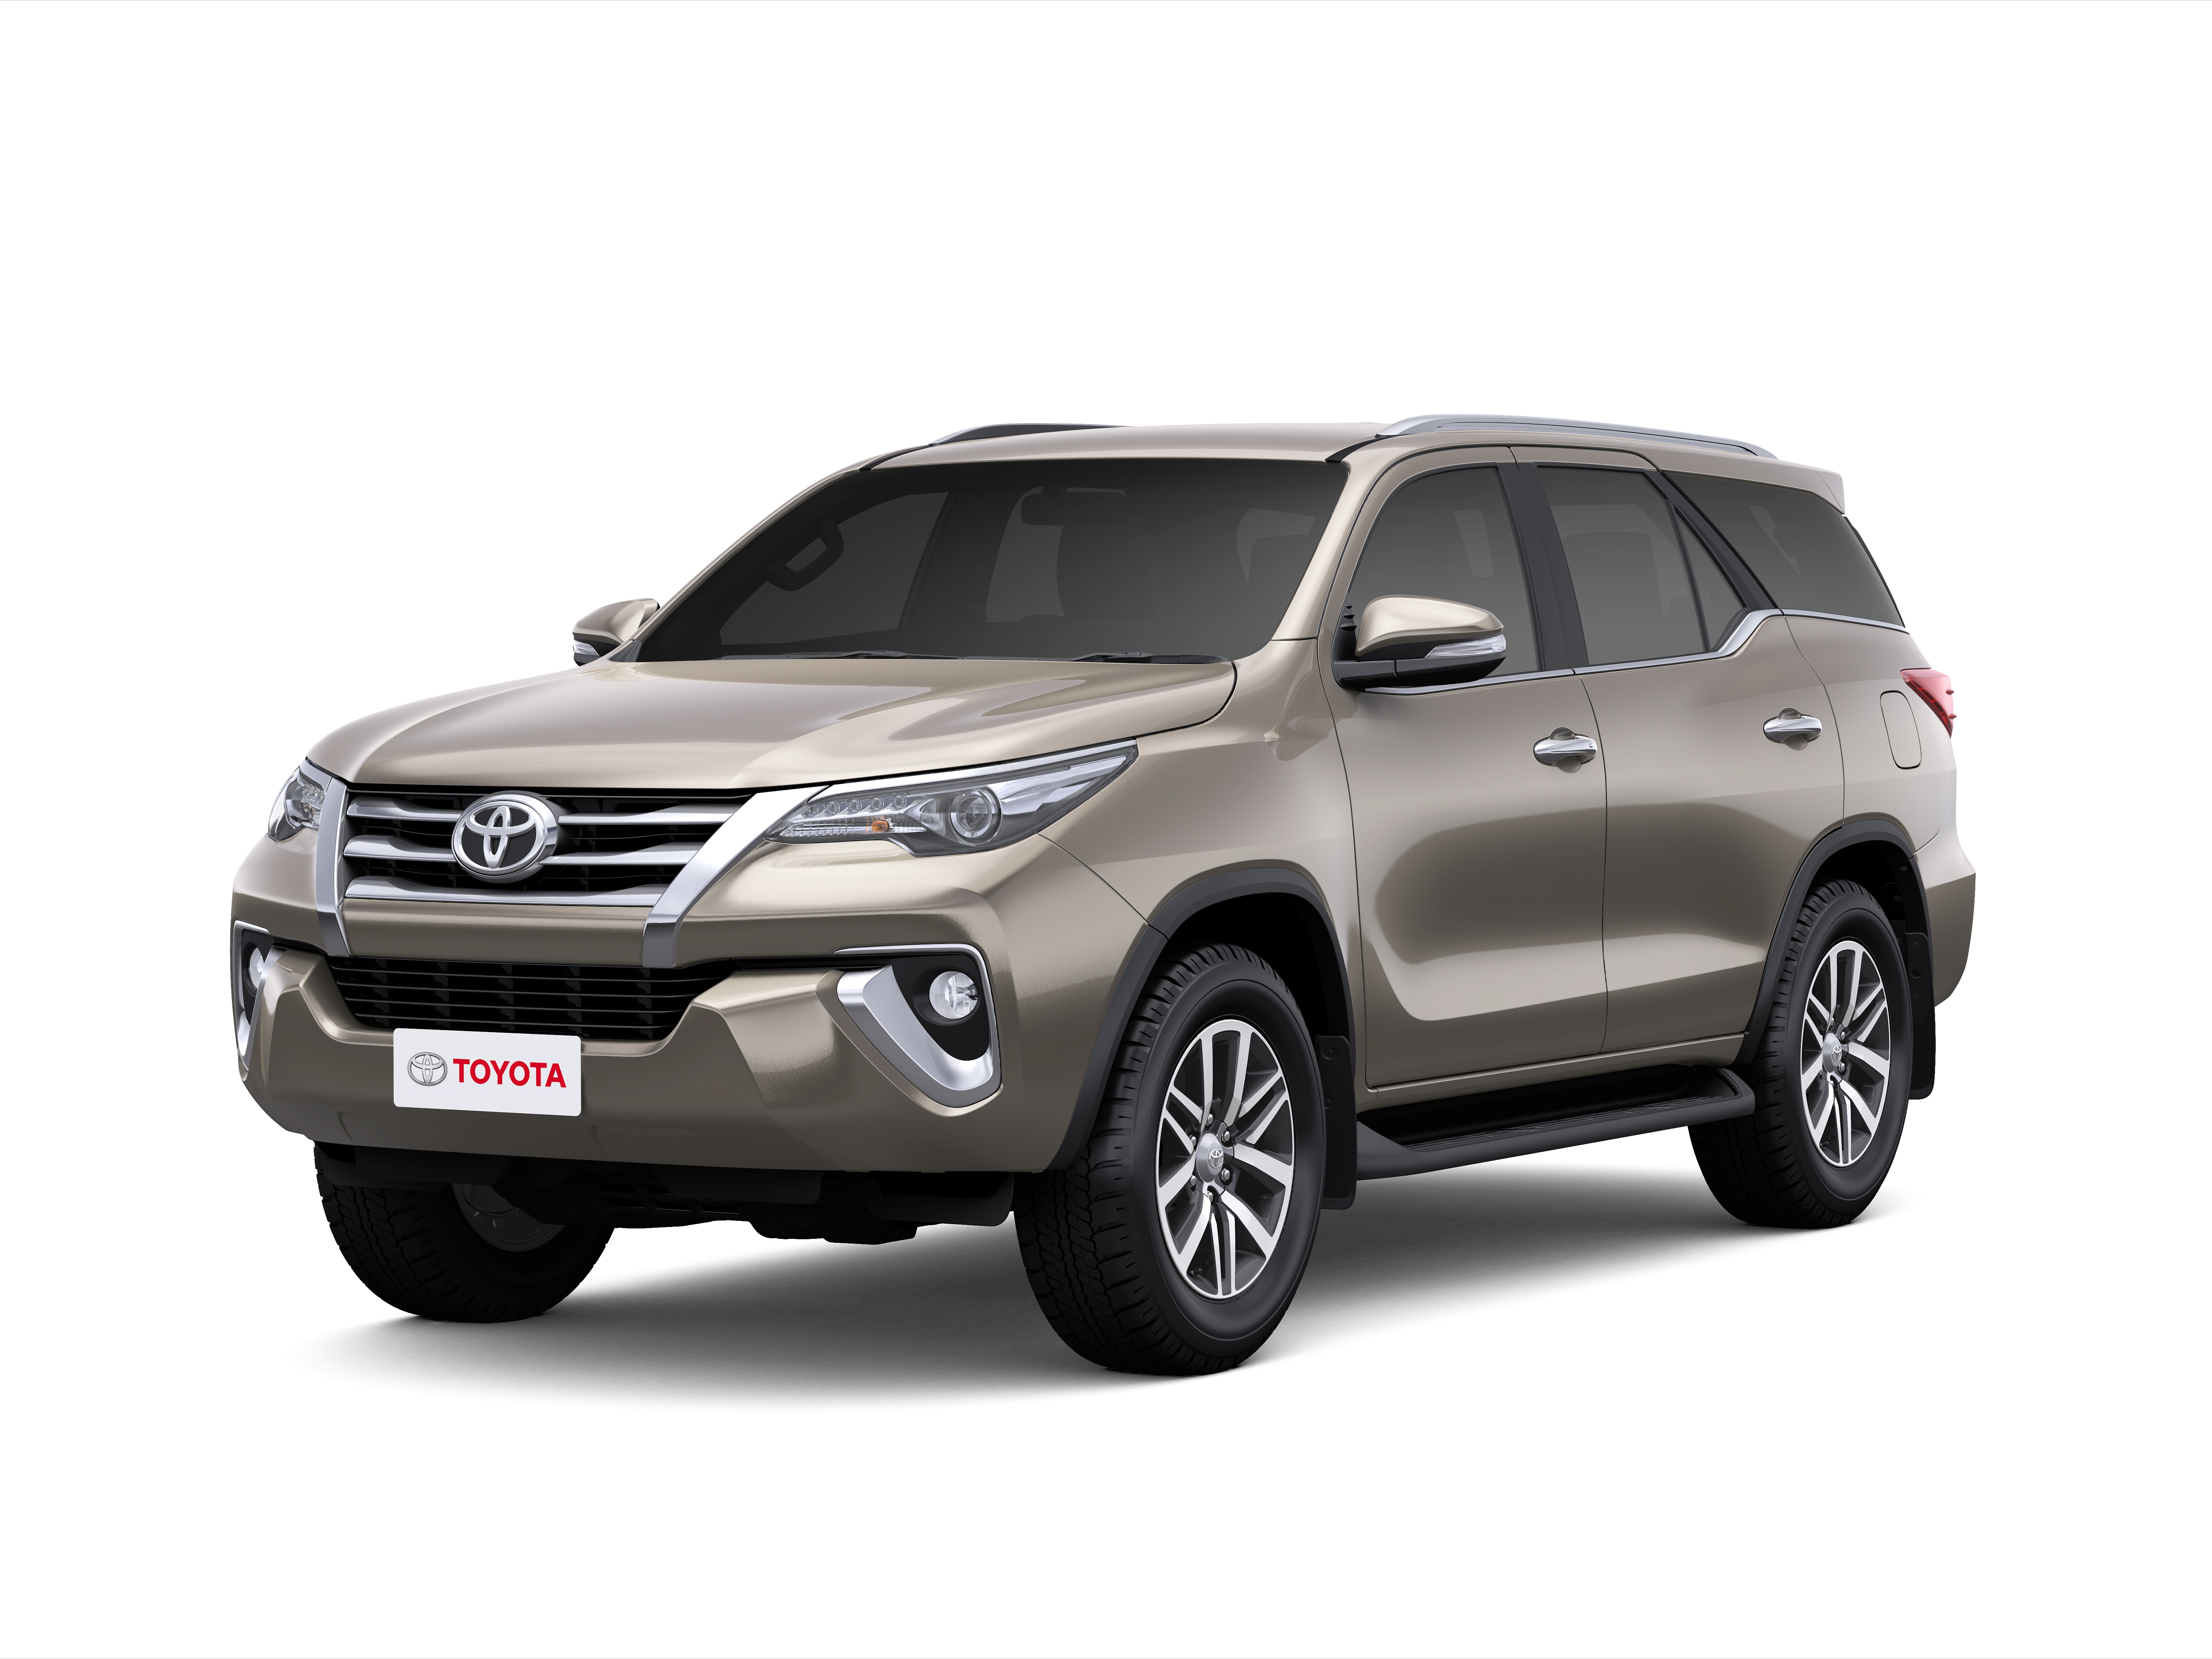 all-new-2016-toyota-fortuner-india-launched-details-pictures-price